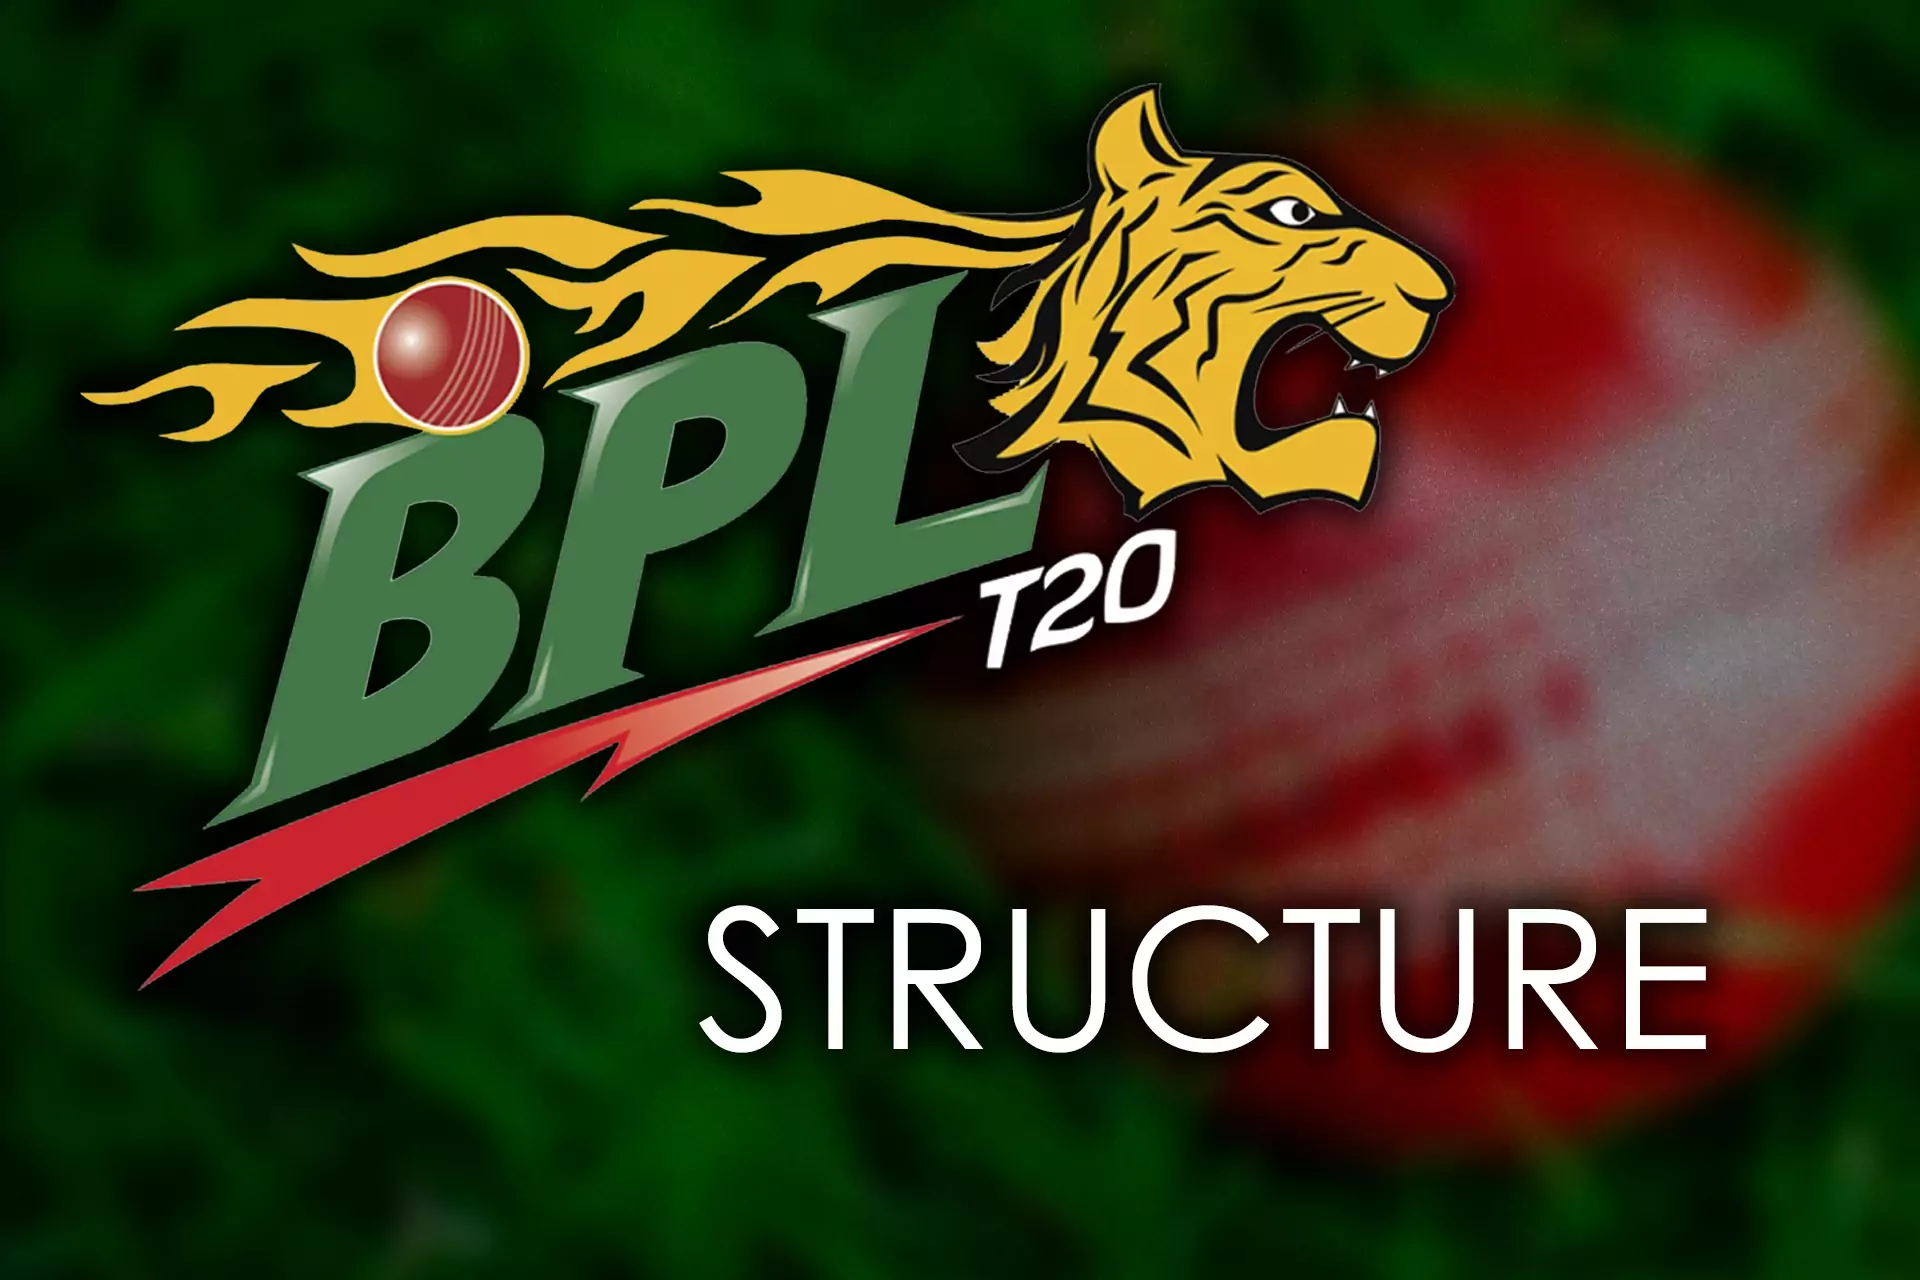 BPL structure isn't much complicated but should be analyzed before betting on the events.